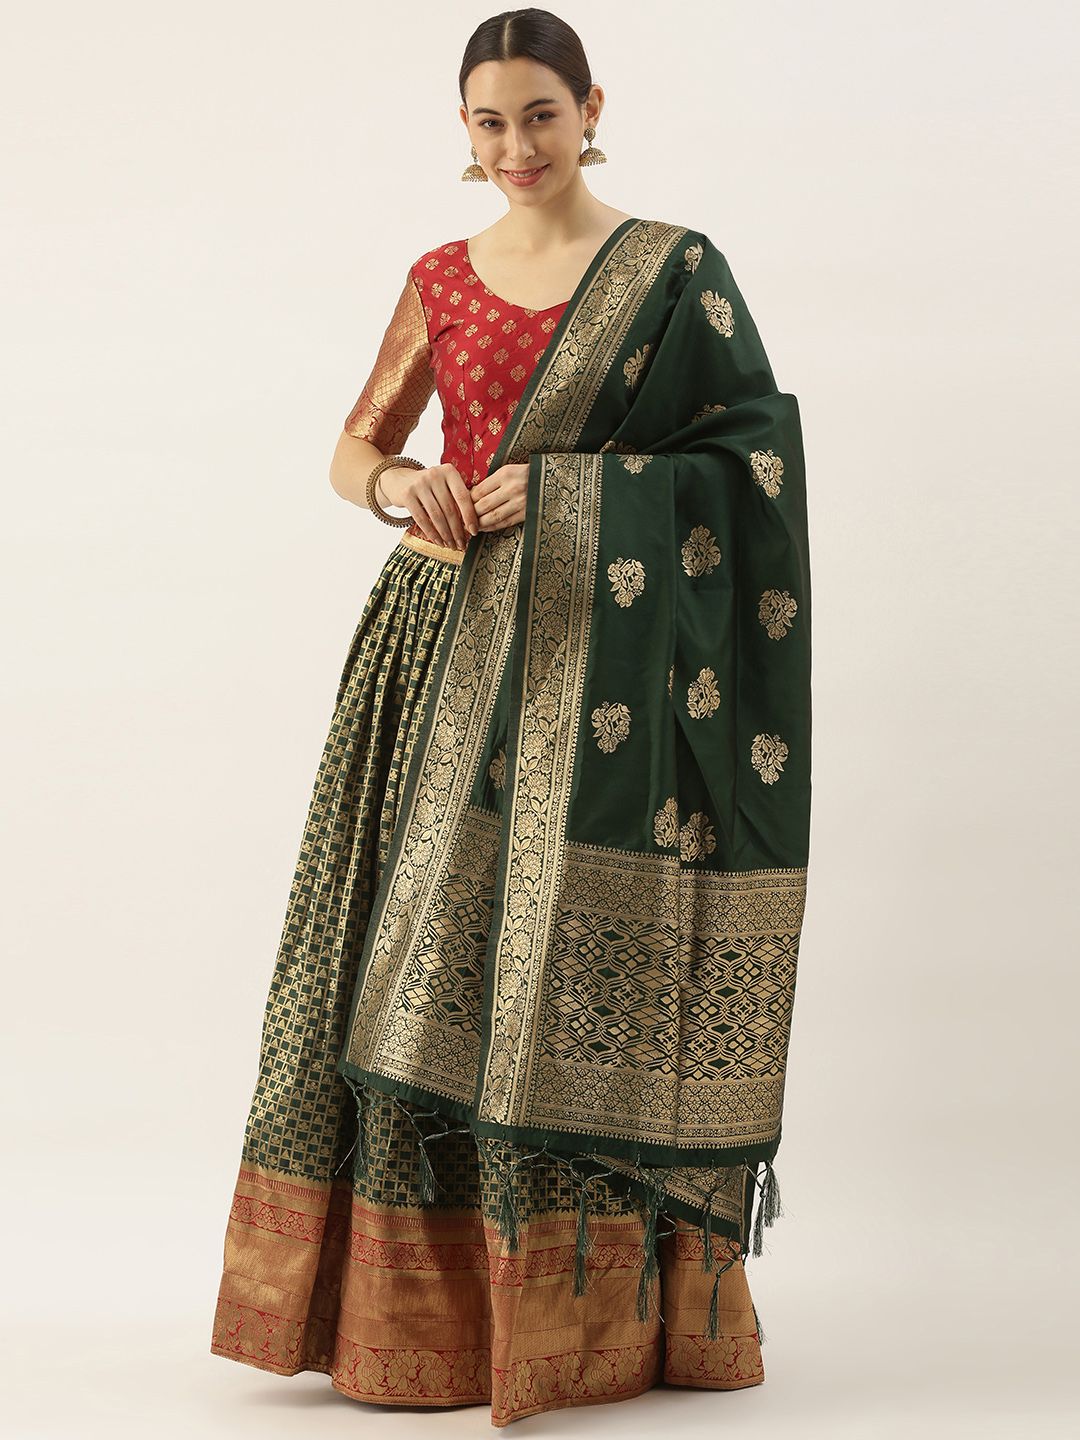 LOOKNBOOK ART Green & Gold-Toned Semi-Stitched Lehenga & Unstitched Blouse With Dupatta Price in India